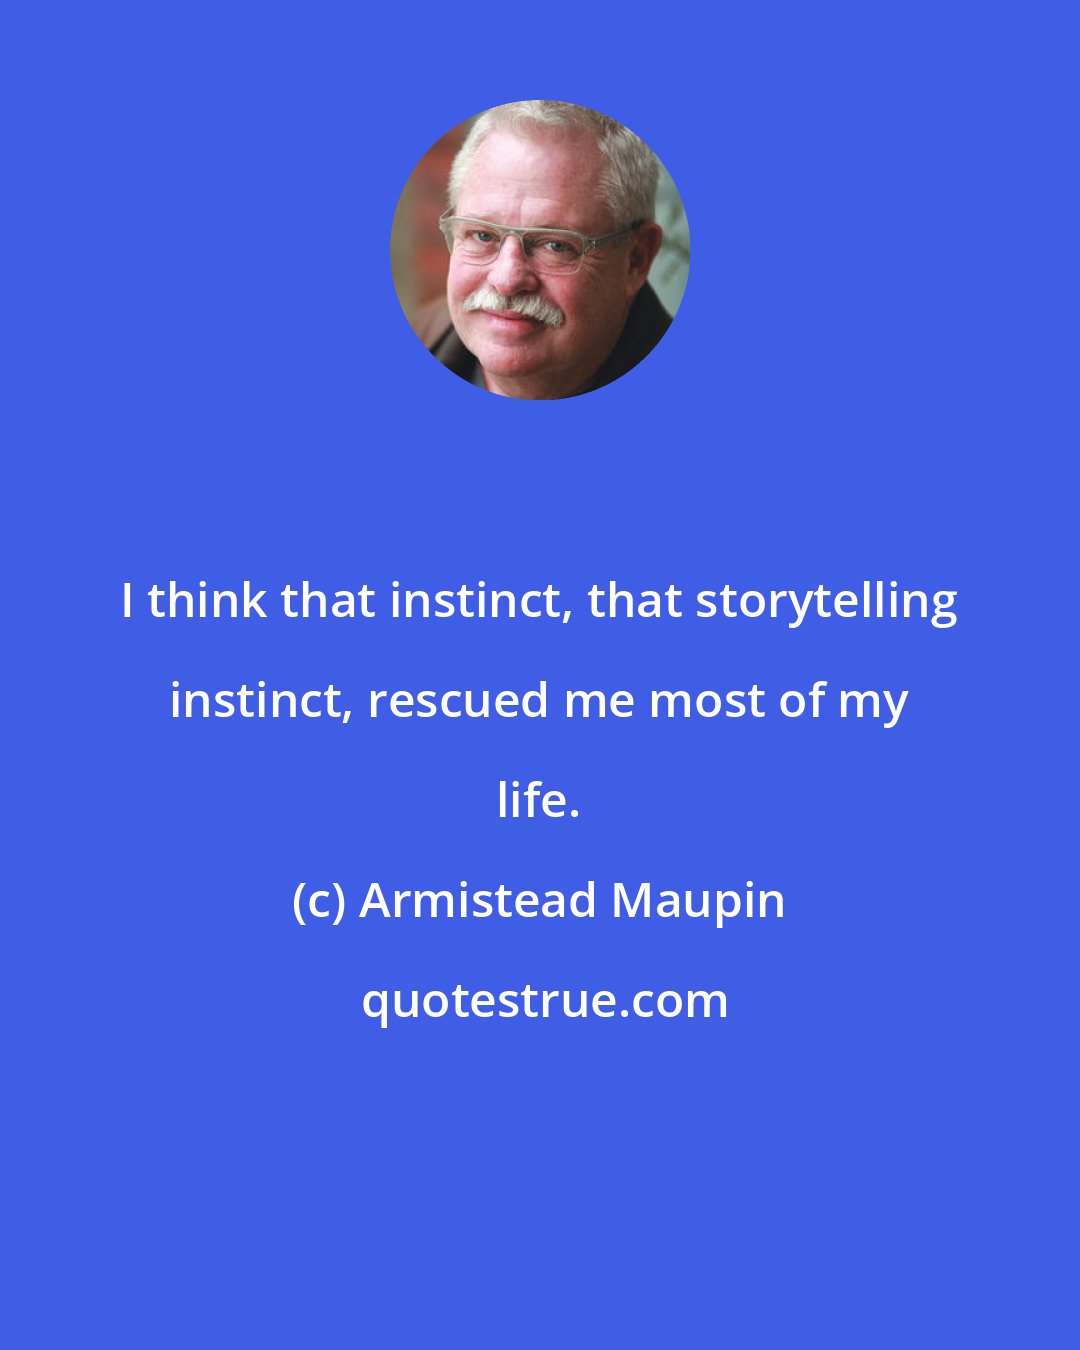 Armistead Maupin: I think that instinct, that storytelling instinct, rescued me most of my life.